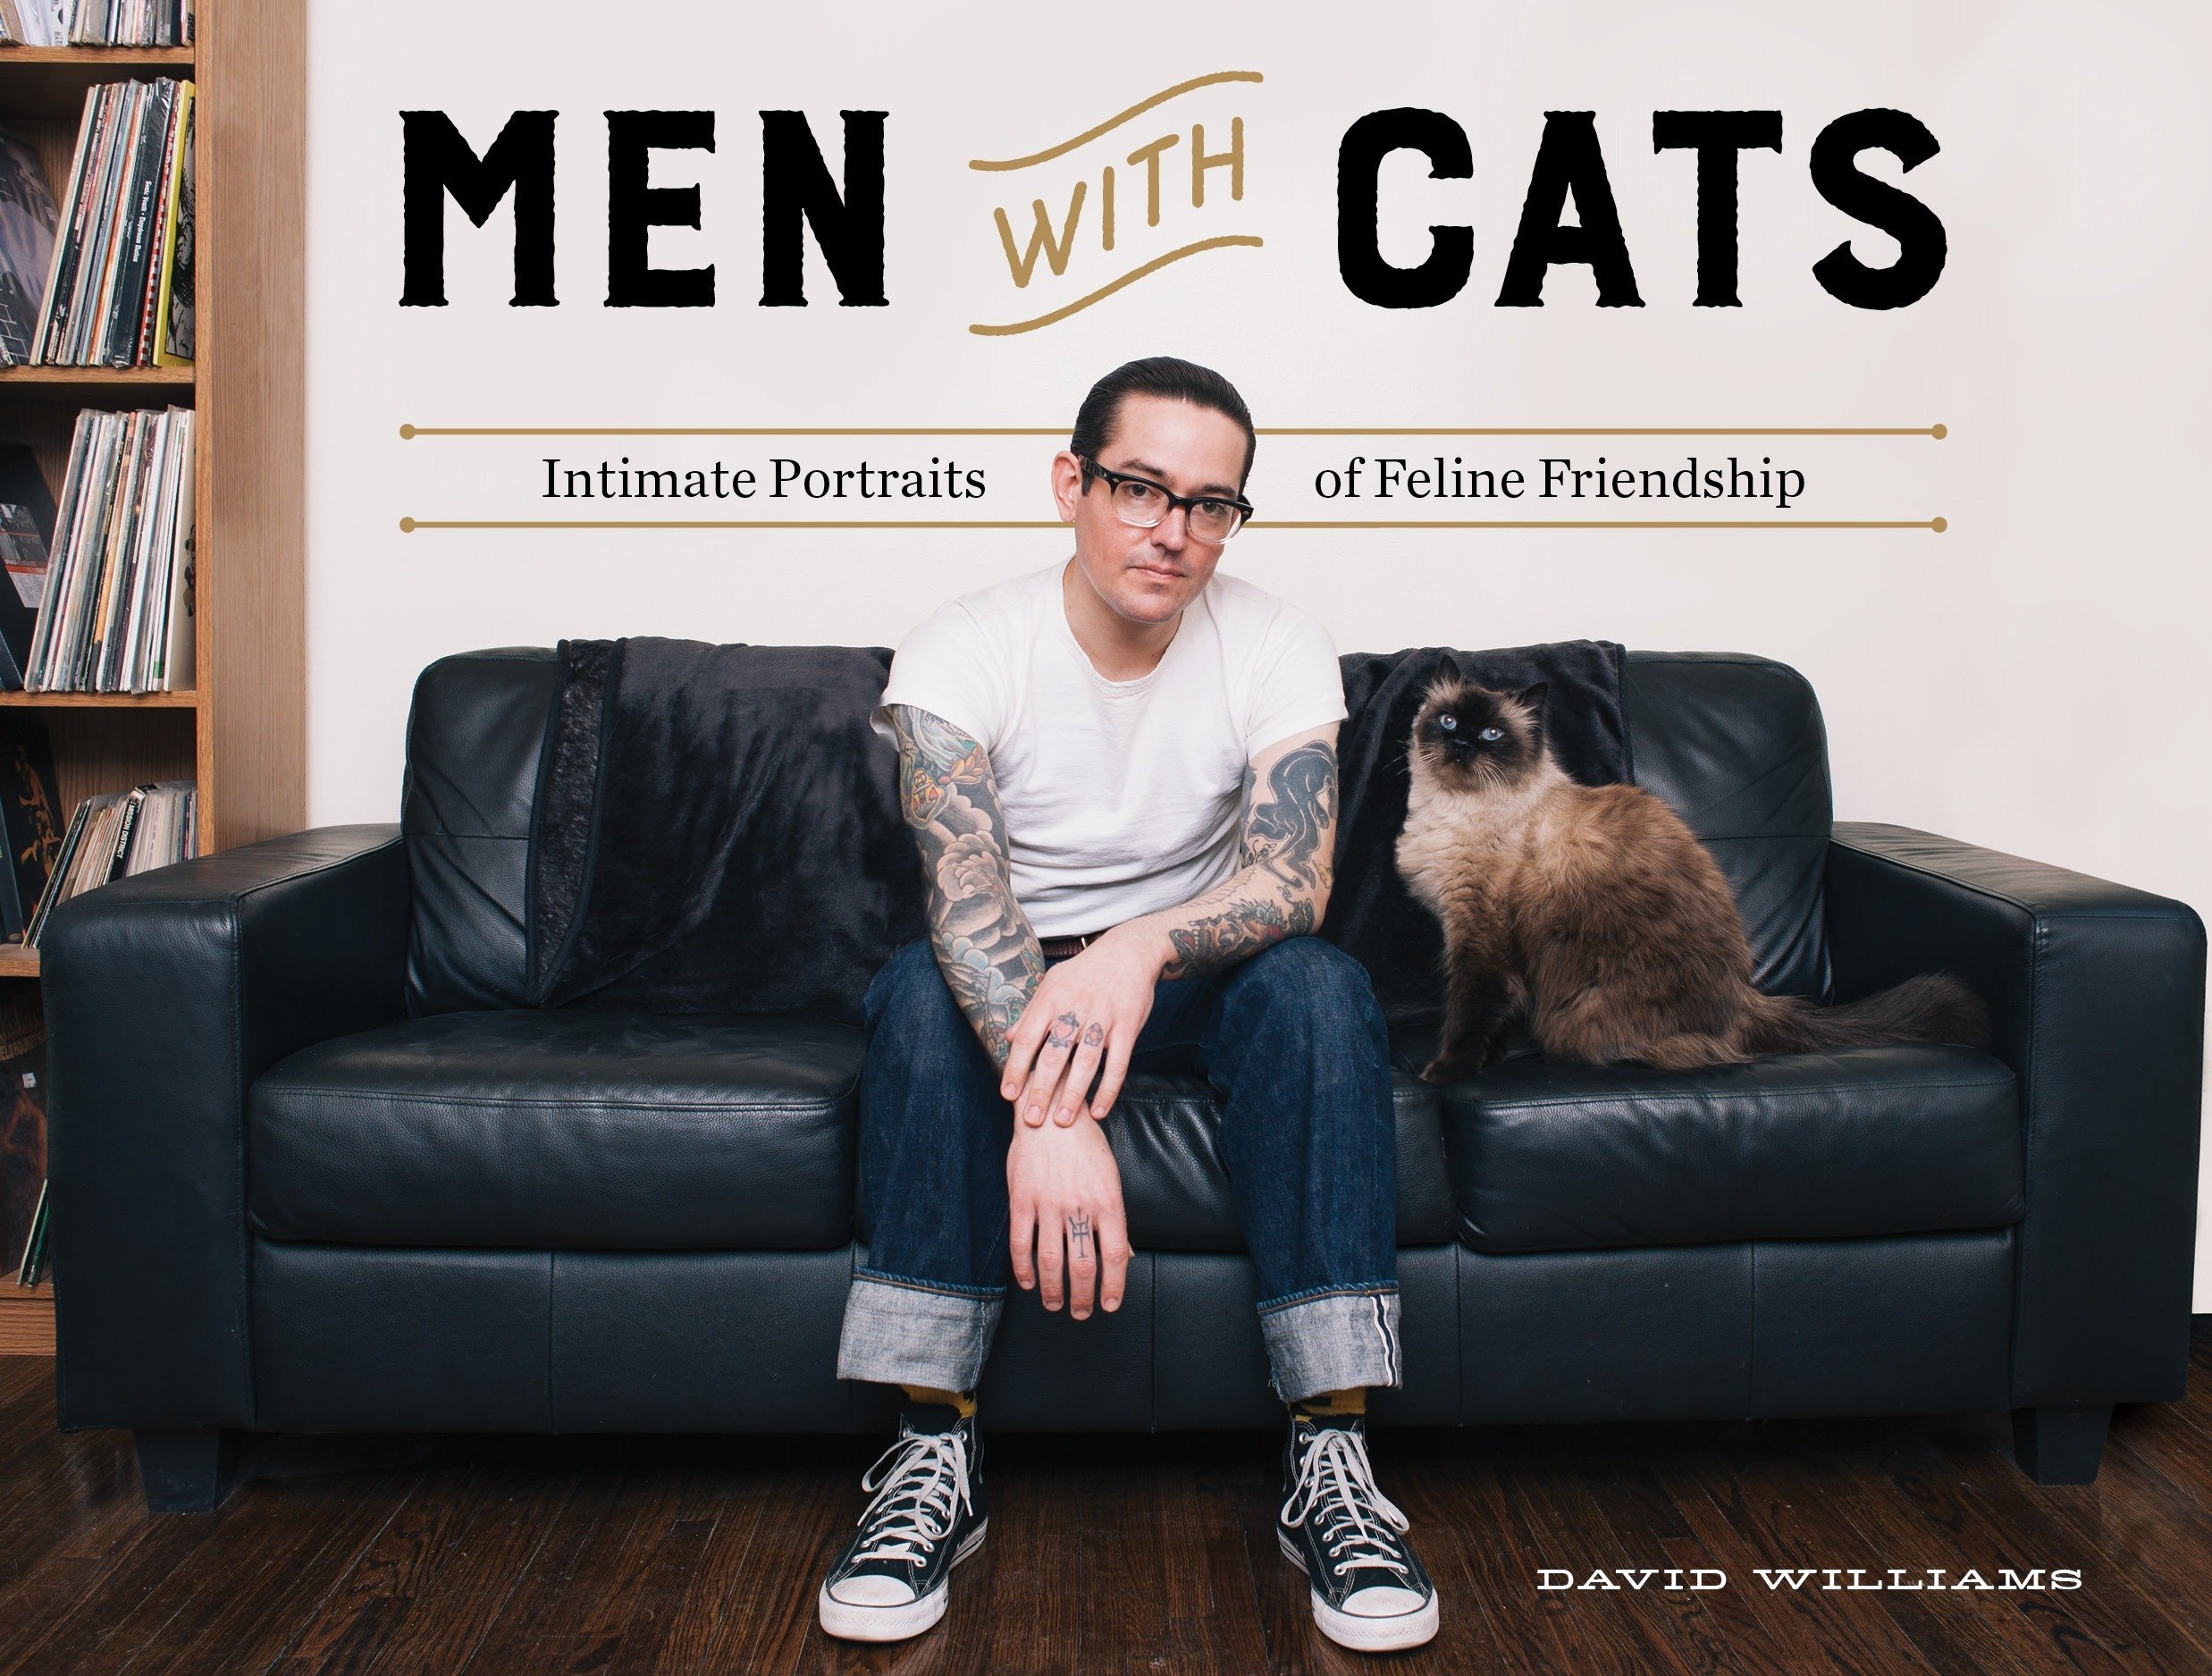 Men with cats : intimate portraits of feline friendship